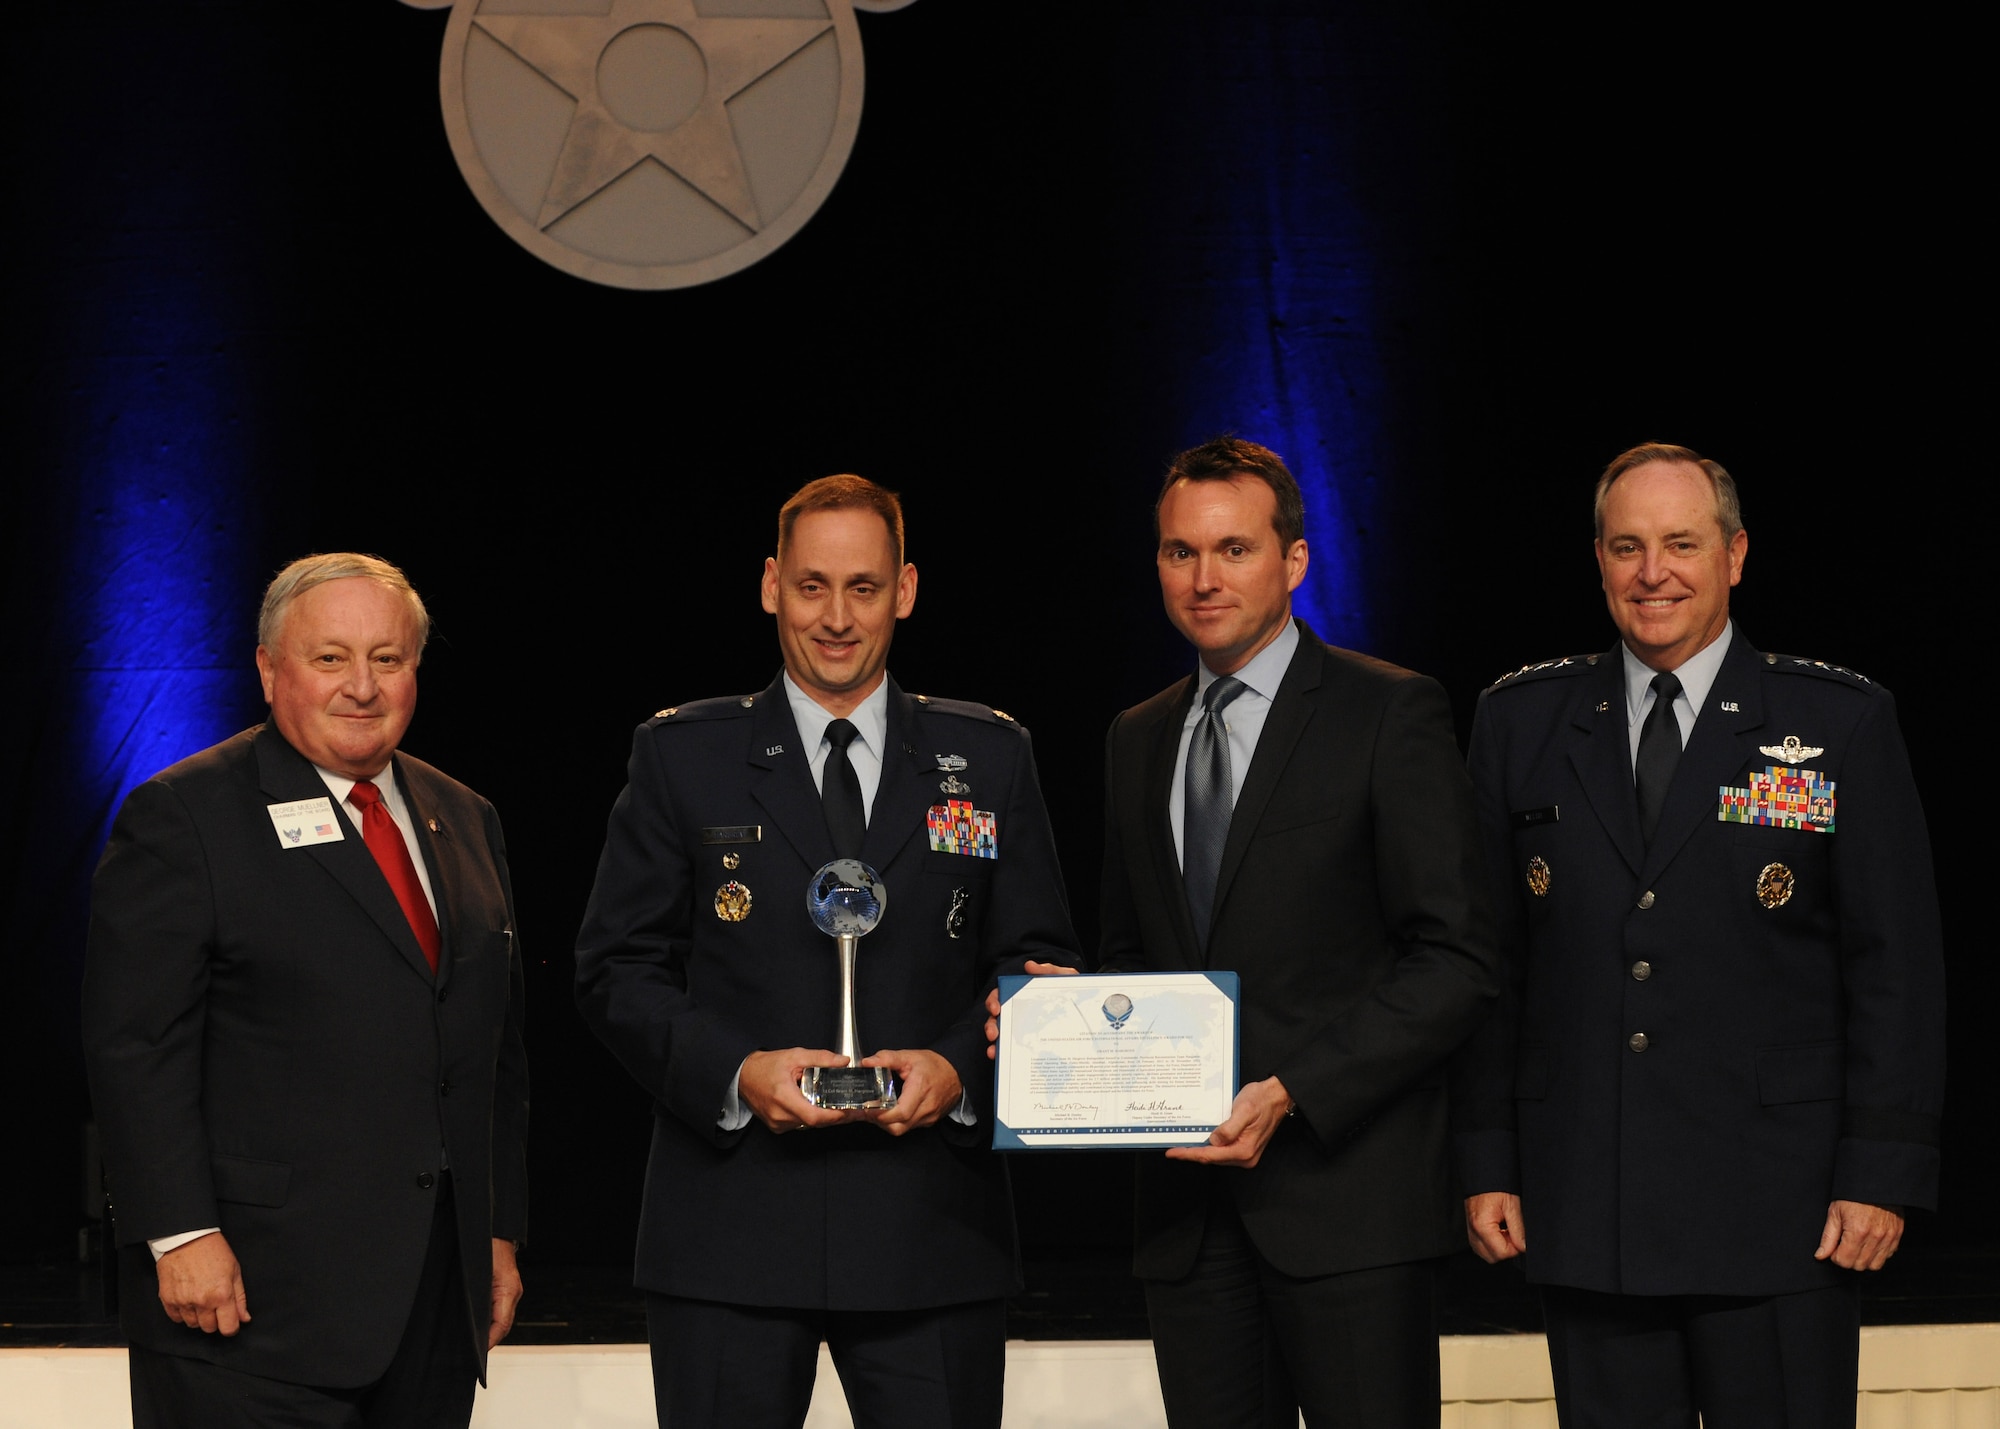 Lt Col. Grant Hargrove is presented the International Affairs Excellence Award by Acting Air Force Secretary Eric Fanning, Air Force Chief of Staff Gen. Mark A. Welsh III and George K. Muellner at the Air Force Association’s 2013 Air & Space Conference and Technology Exposition Sept. 16, 2013, in Washington, D.C. The International Affairs Excellence Award is presented annually for outstanding and innovative contributions effective in building, sustaining, expanding and guiding Air Force-to-partner relationships. Muellner is the Air Force Association chairman of the board.  (U.S. Air Force photo/Airman 1st Class Aaron Stout) 